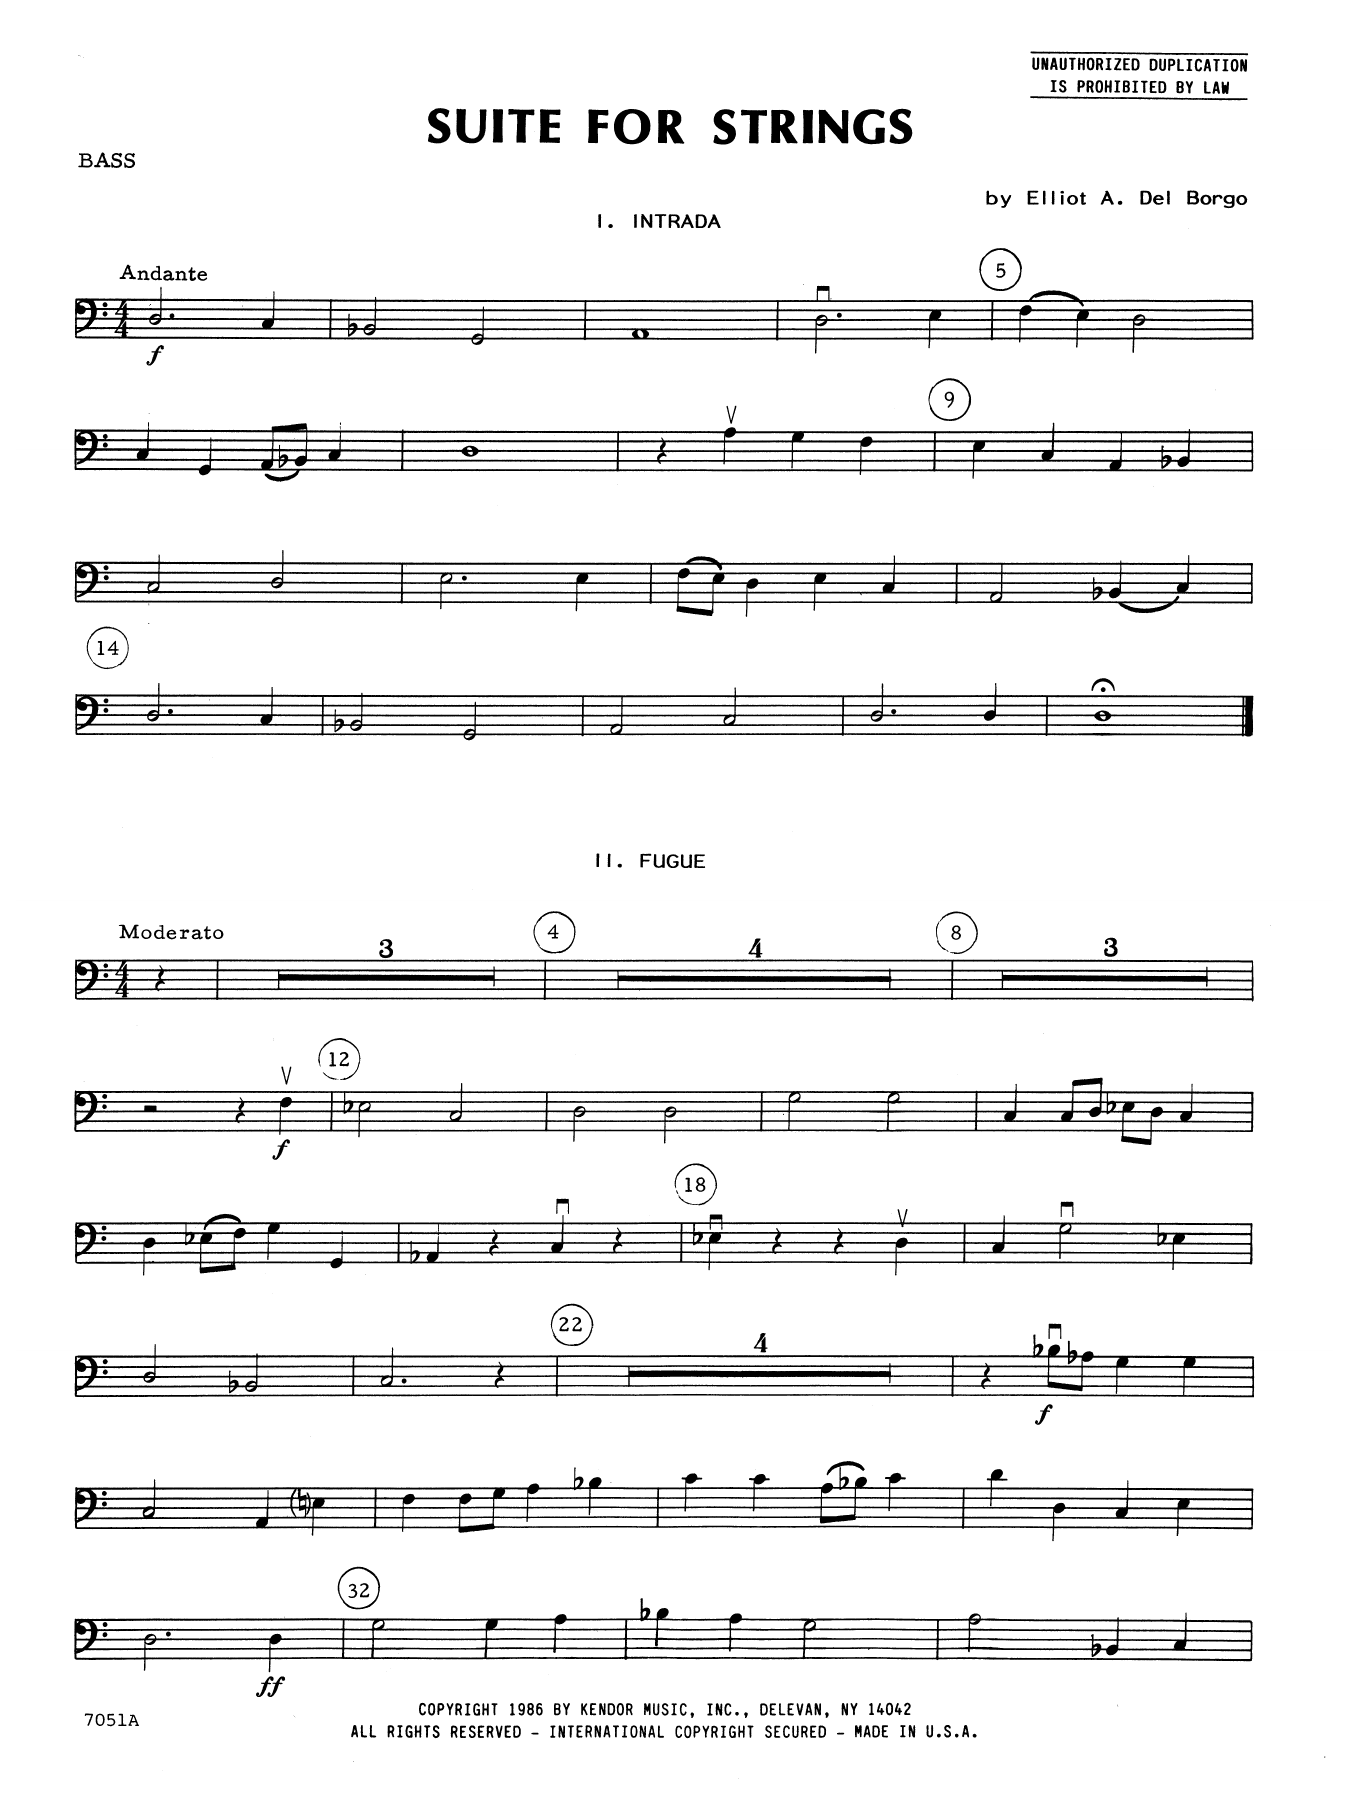 Download Elliot A. Del Borgo Suite for Strings - Bass Sheet Music